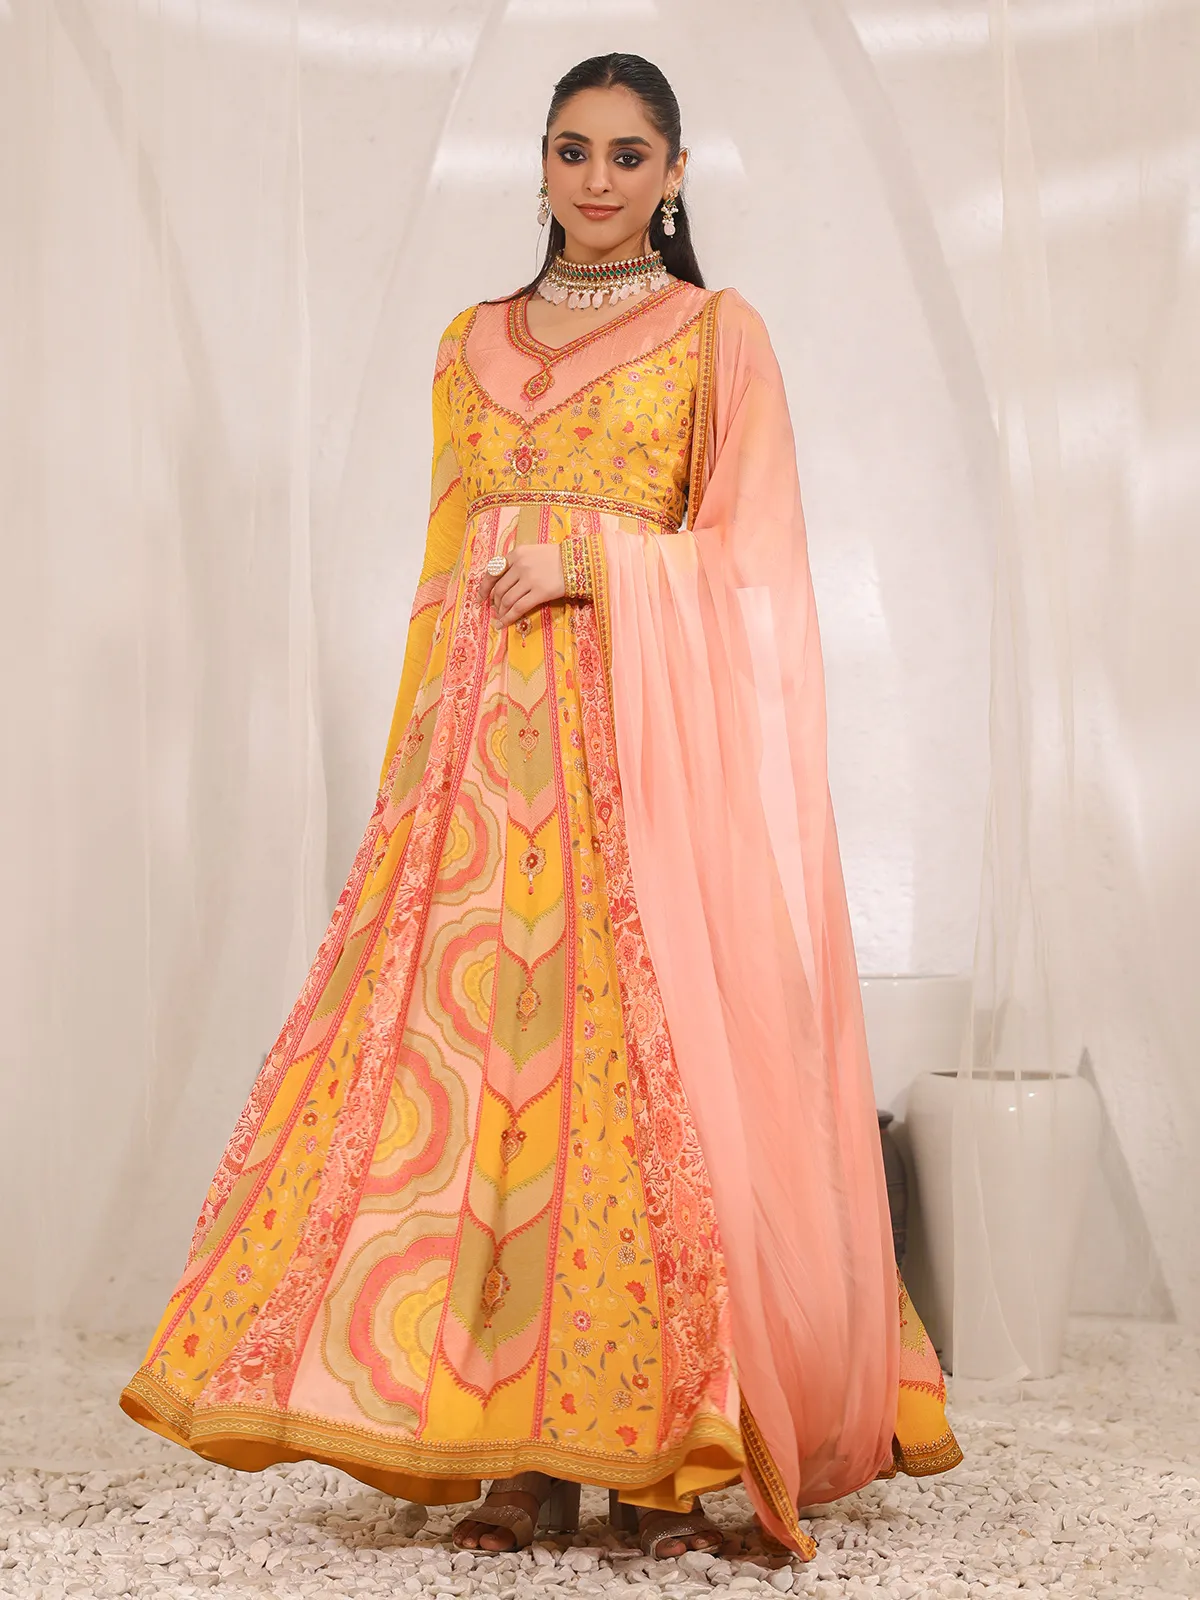 Newest yellow printed anarkali suit